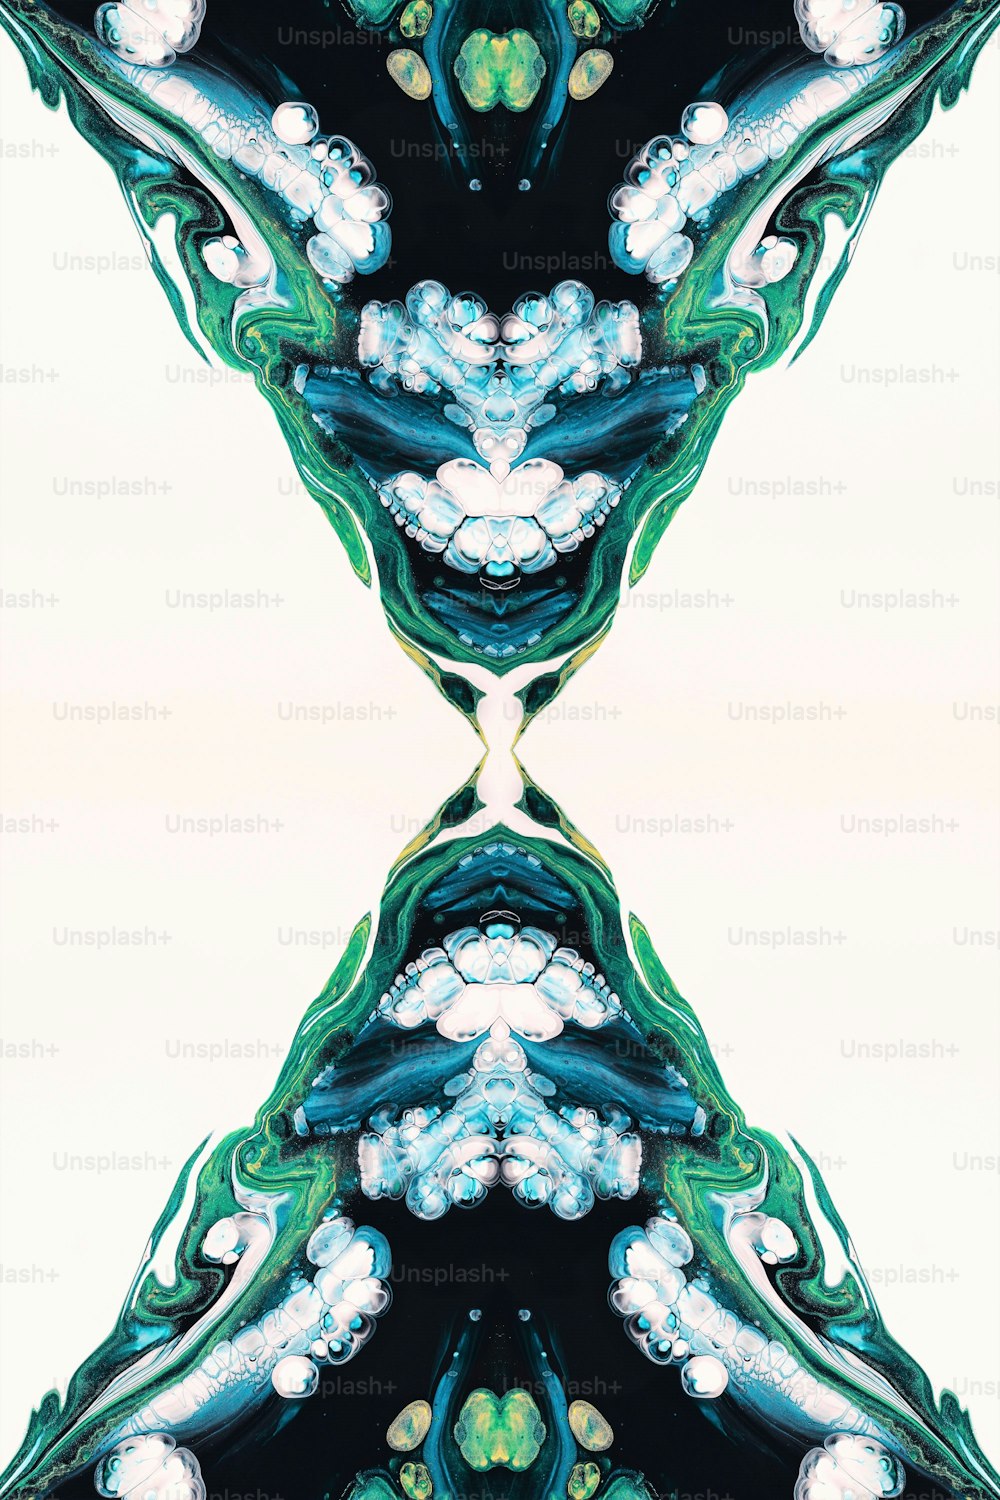 a picture of an abstract design in blue, green and white